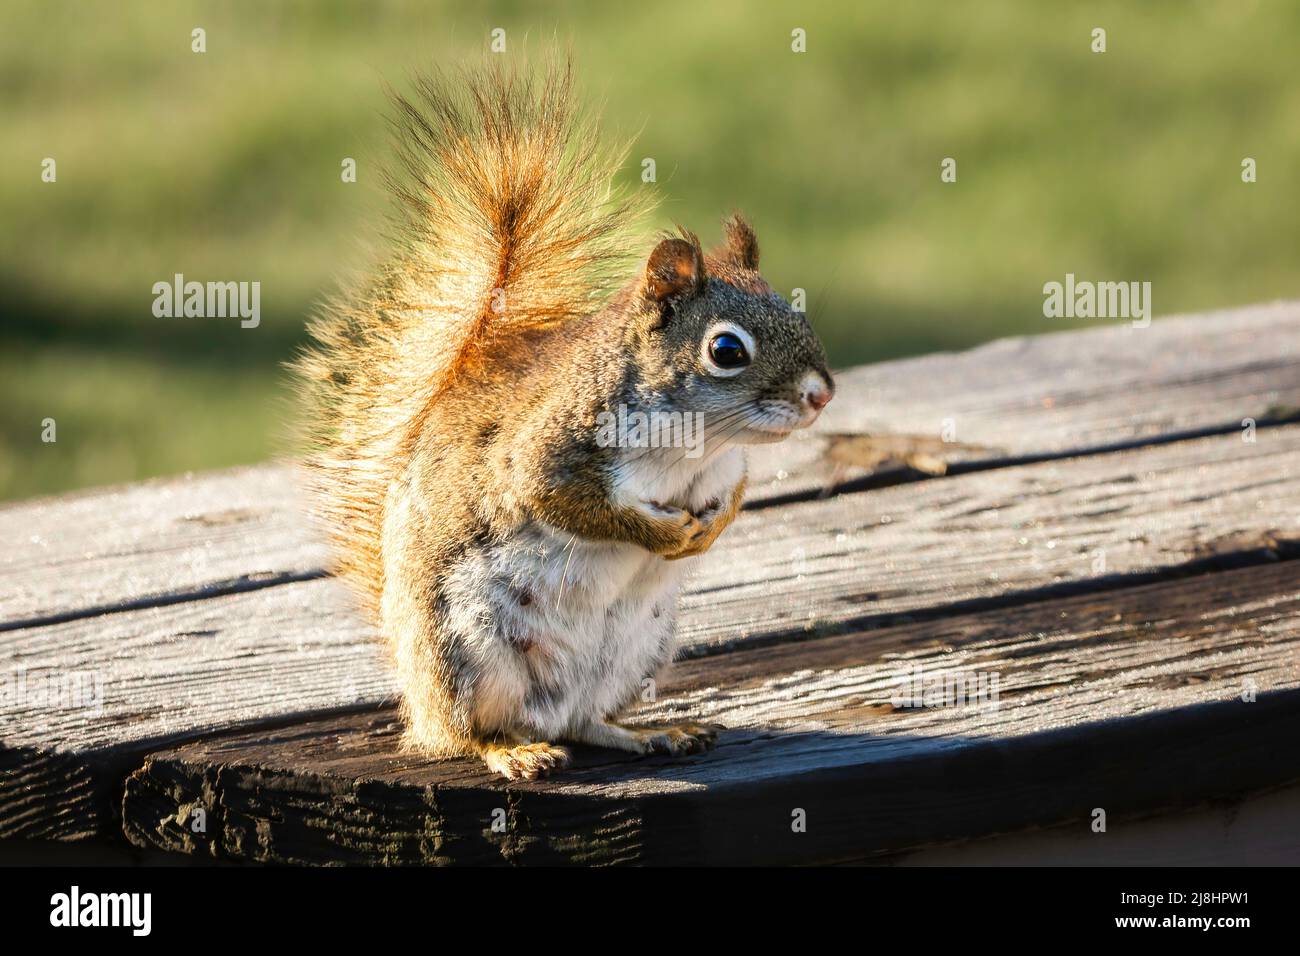 An American Red Squirrel sits on a wood bench as if begging for peanuts in Saline, Michigan. Stock Photo